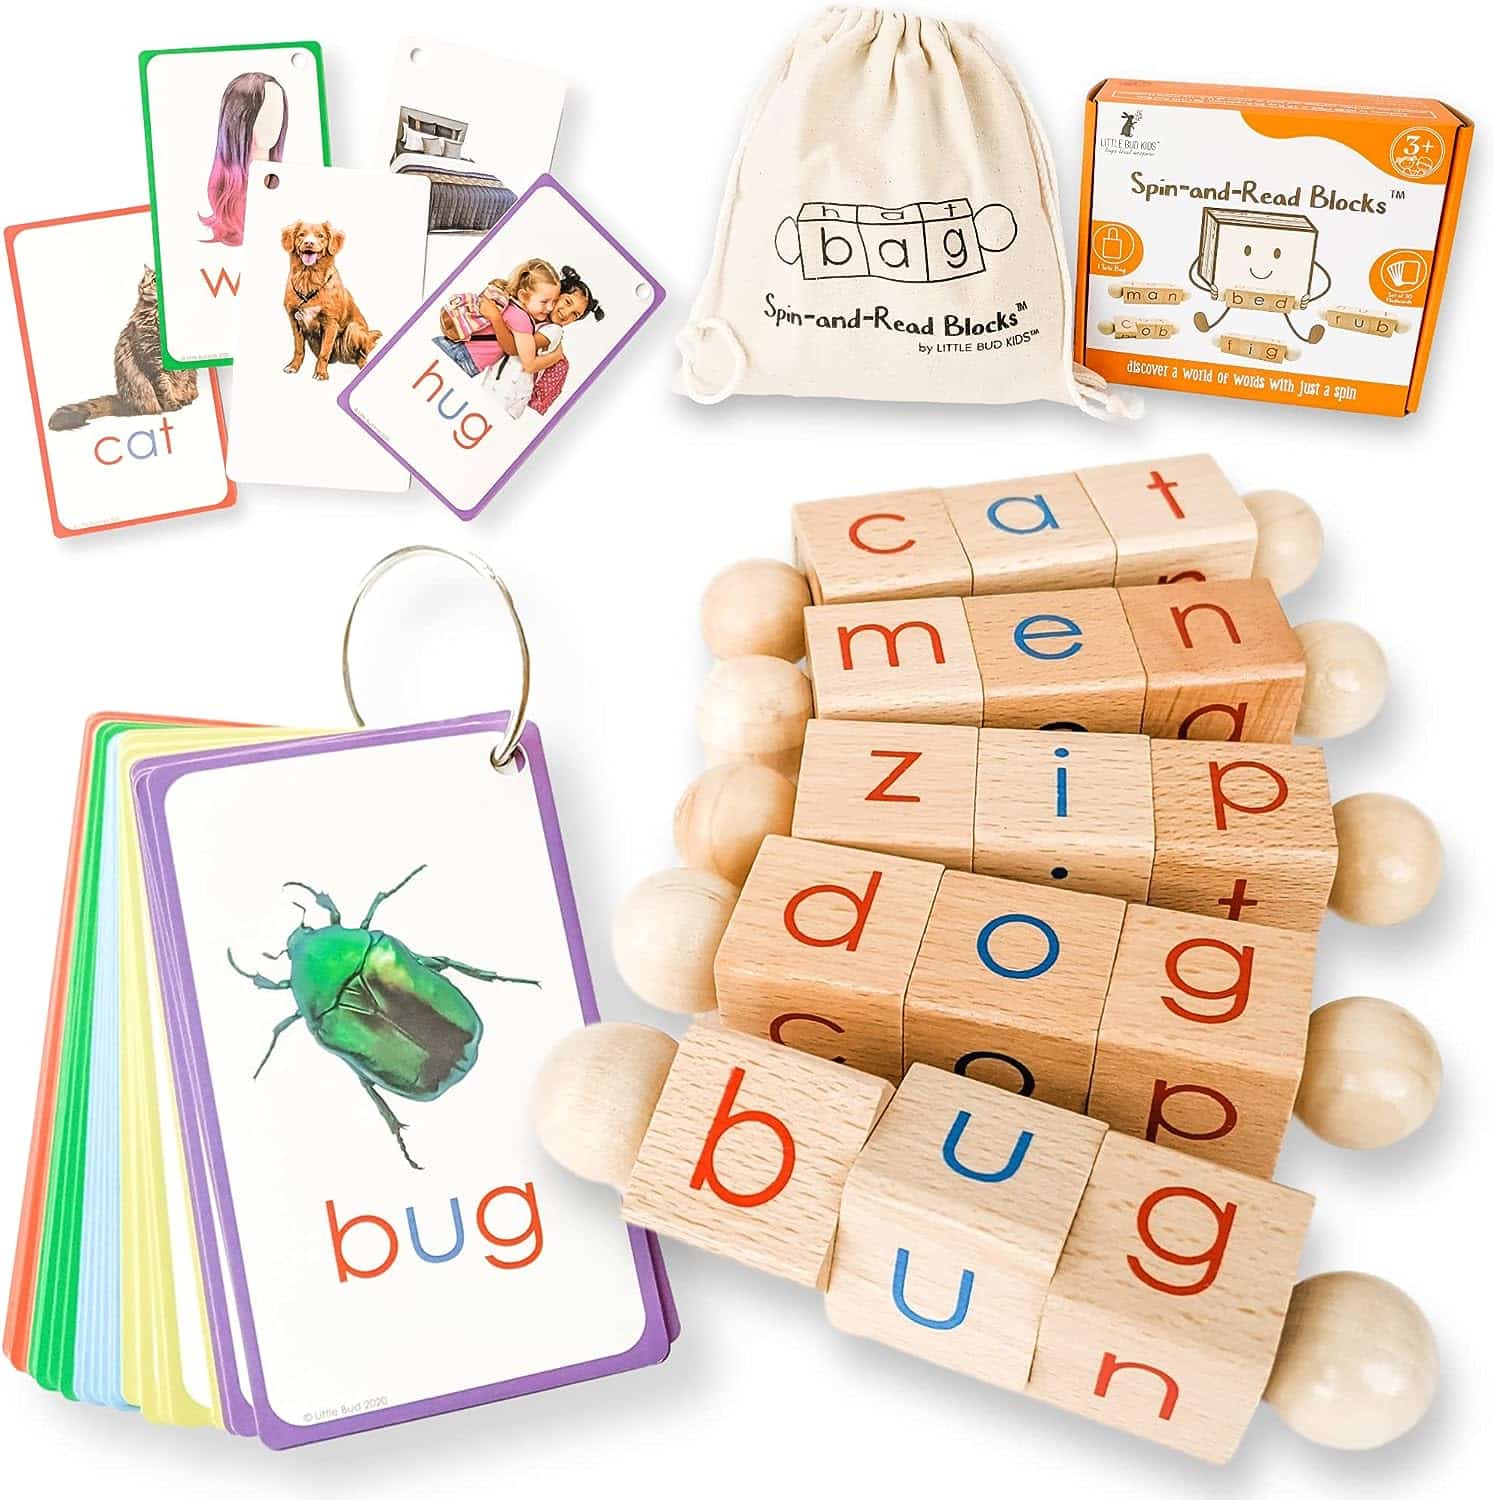 Spin-and-Read Montessori Phonetic Reading Blocks with CVC Phonics Flashcards for Beginner Readers, Montessori Reading Wooden Toys for 3 Years +